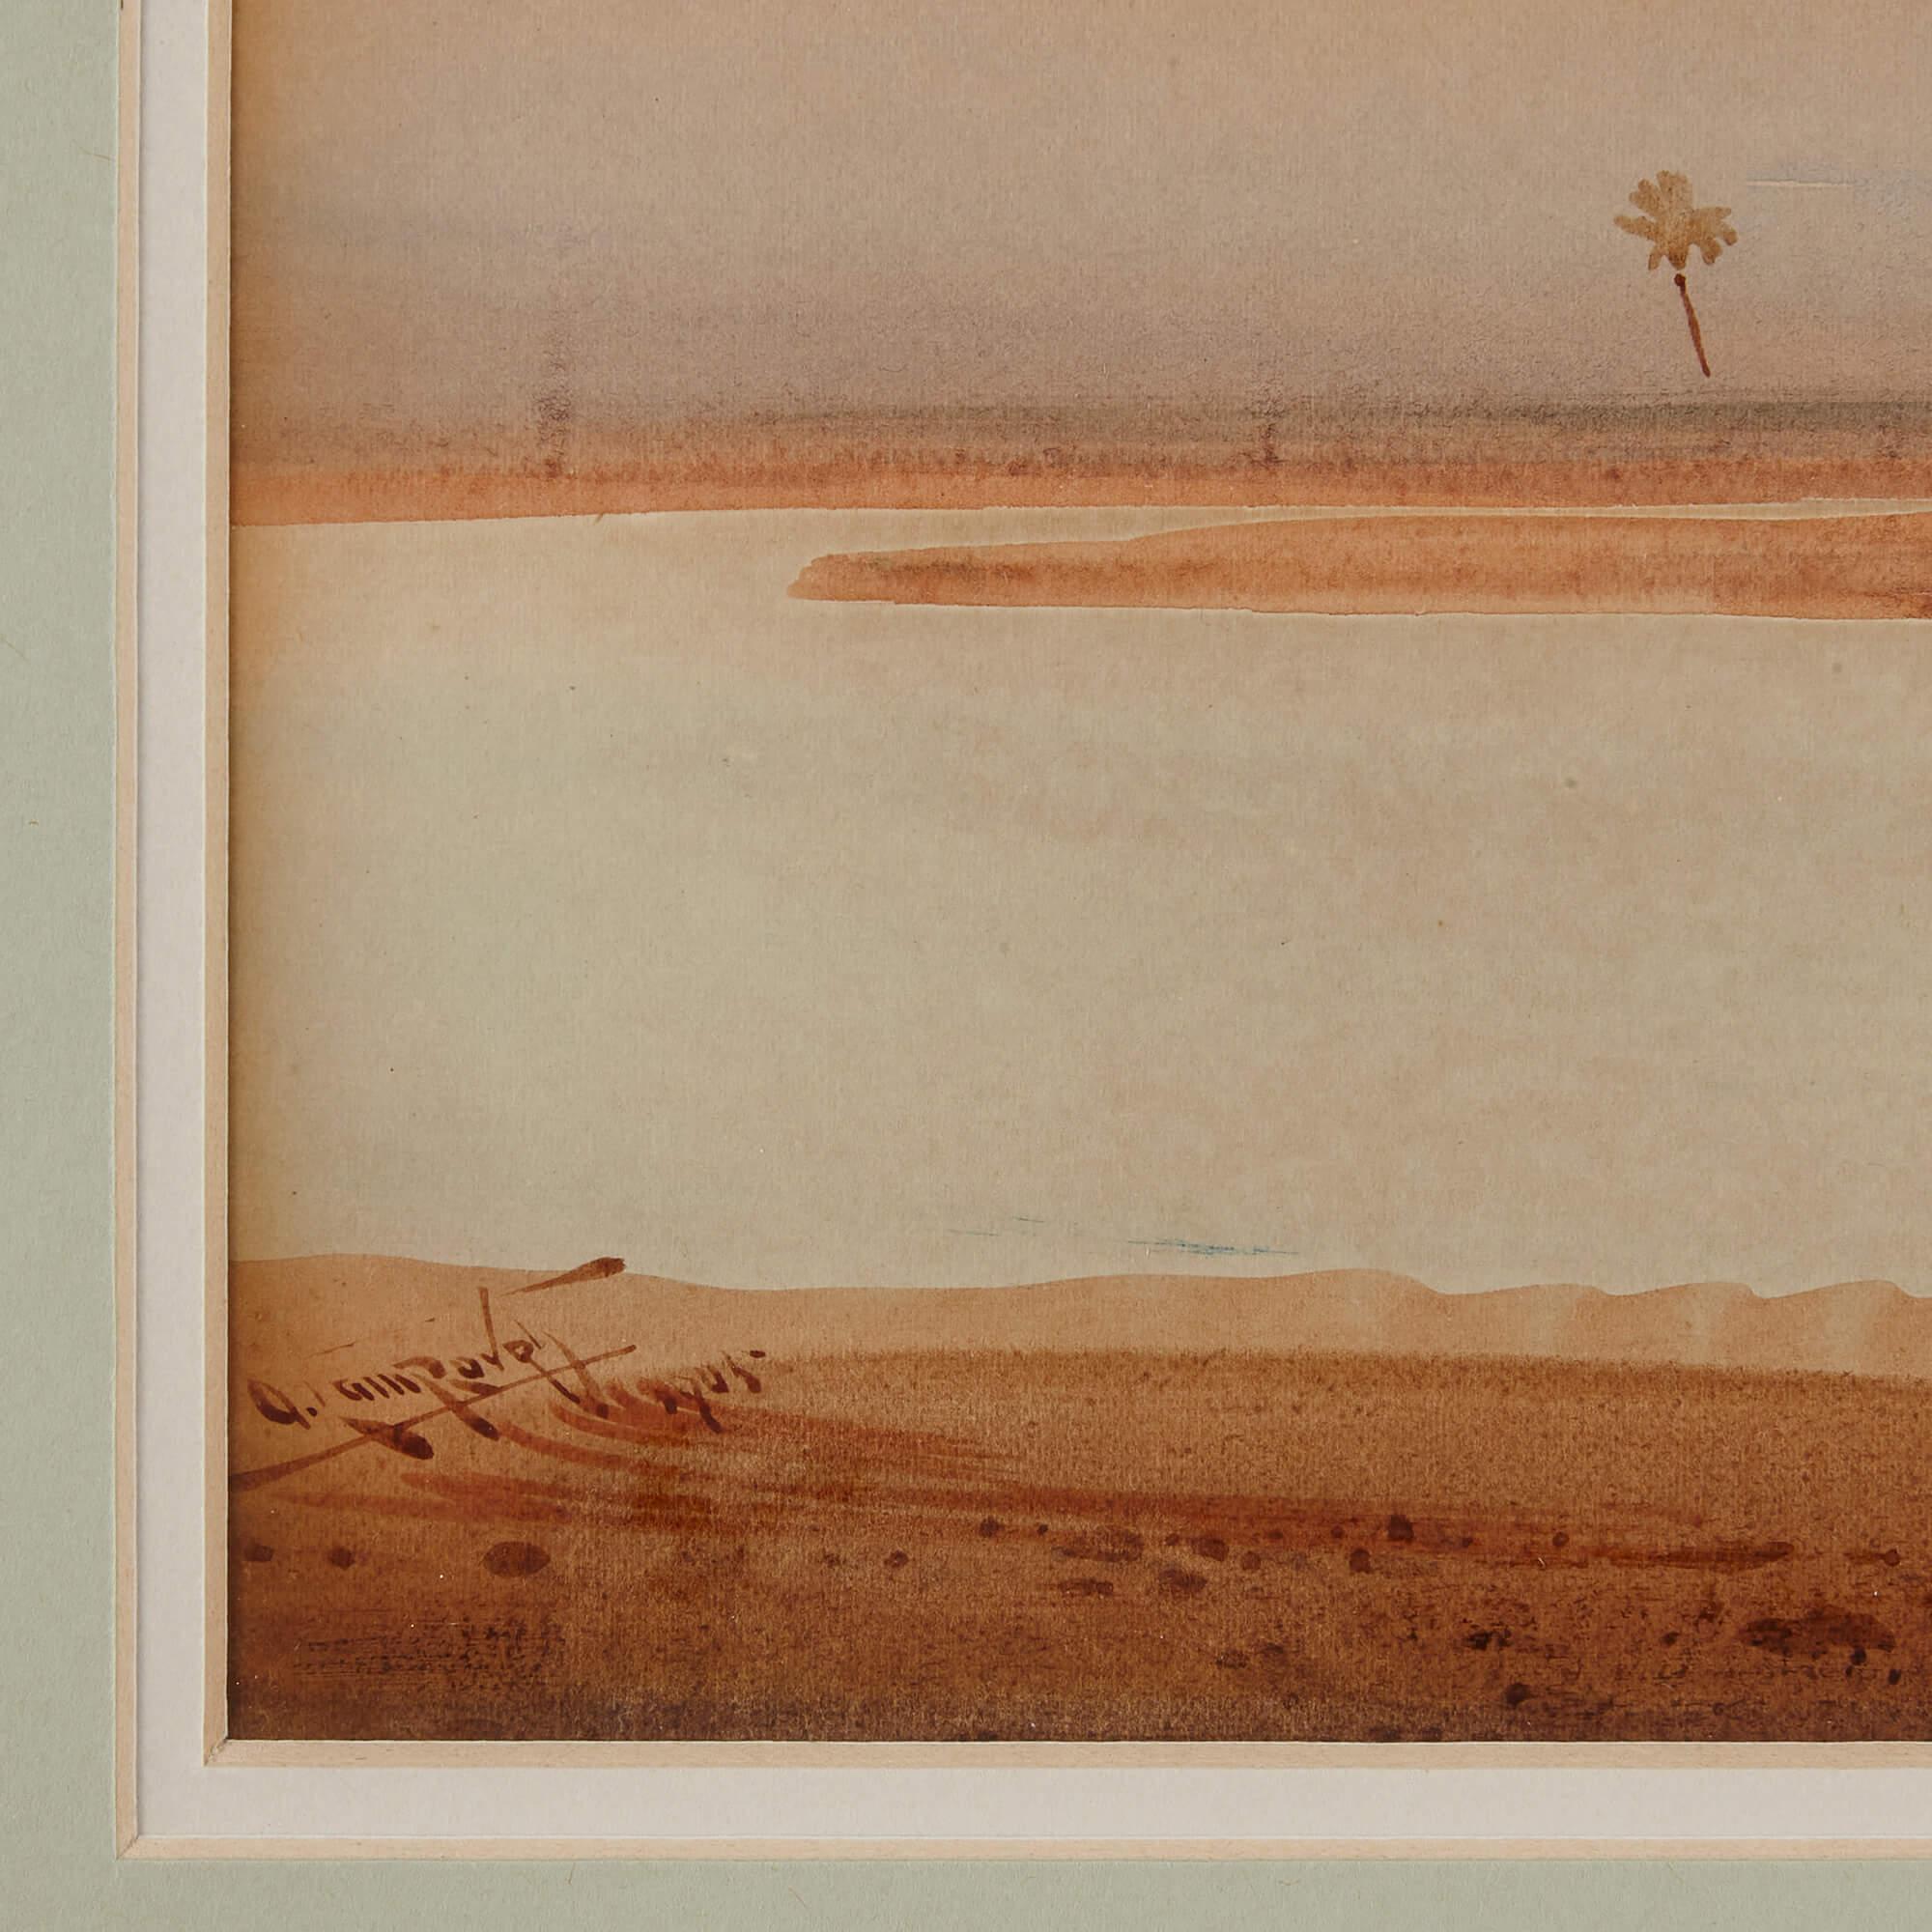 Pair of Orientalist watercolour paintings of desert landscapes by A. Lamplough 1